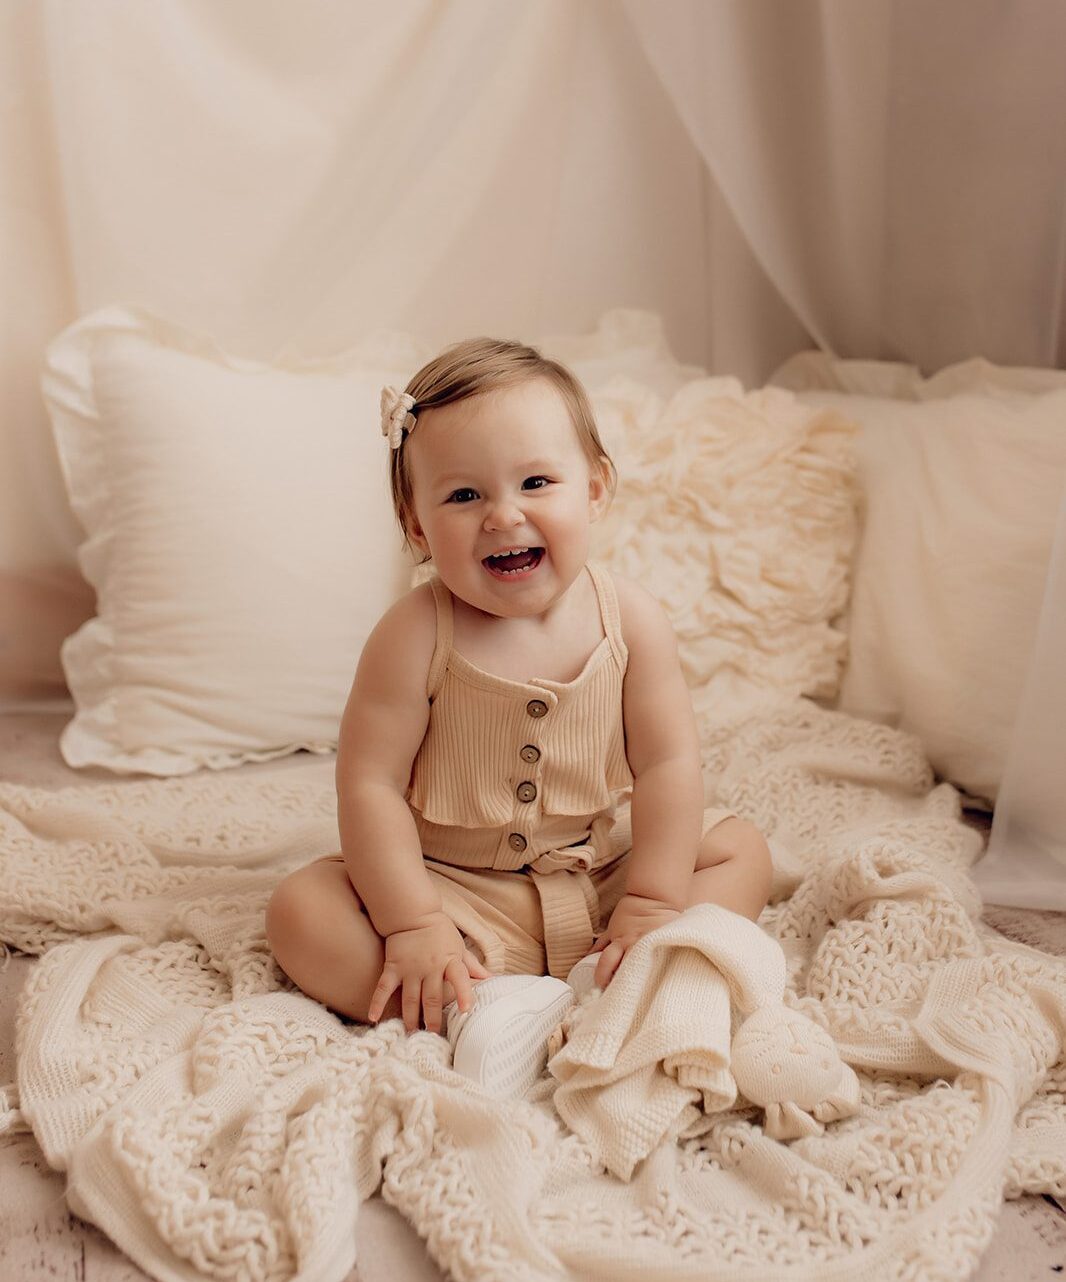 A toddler girl sits on a white bed laughing in a studio